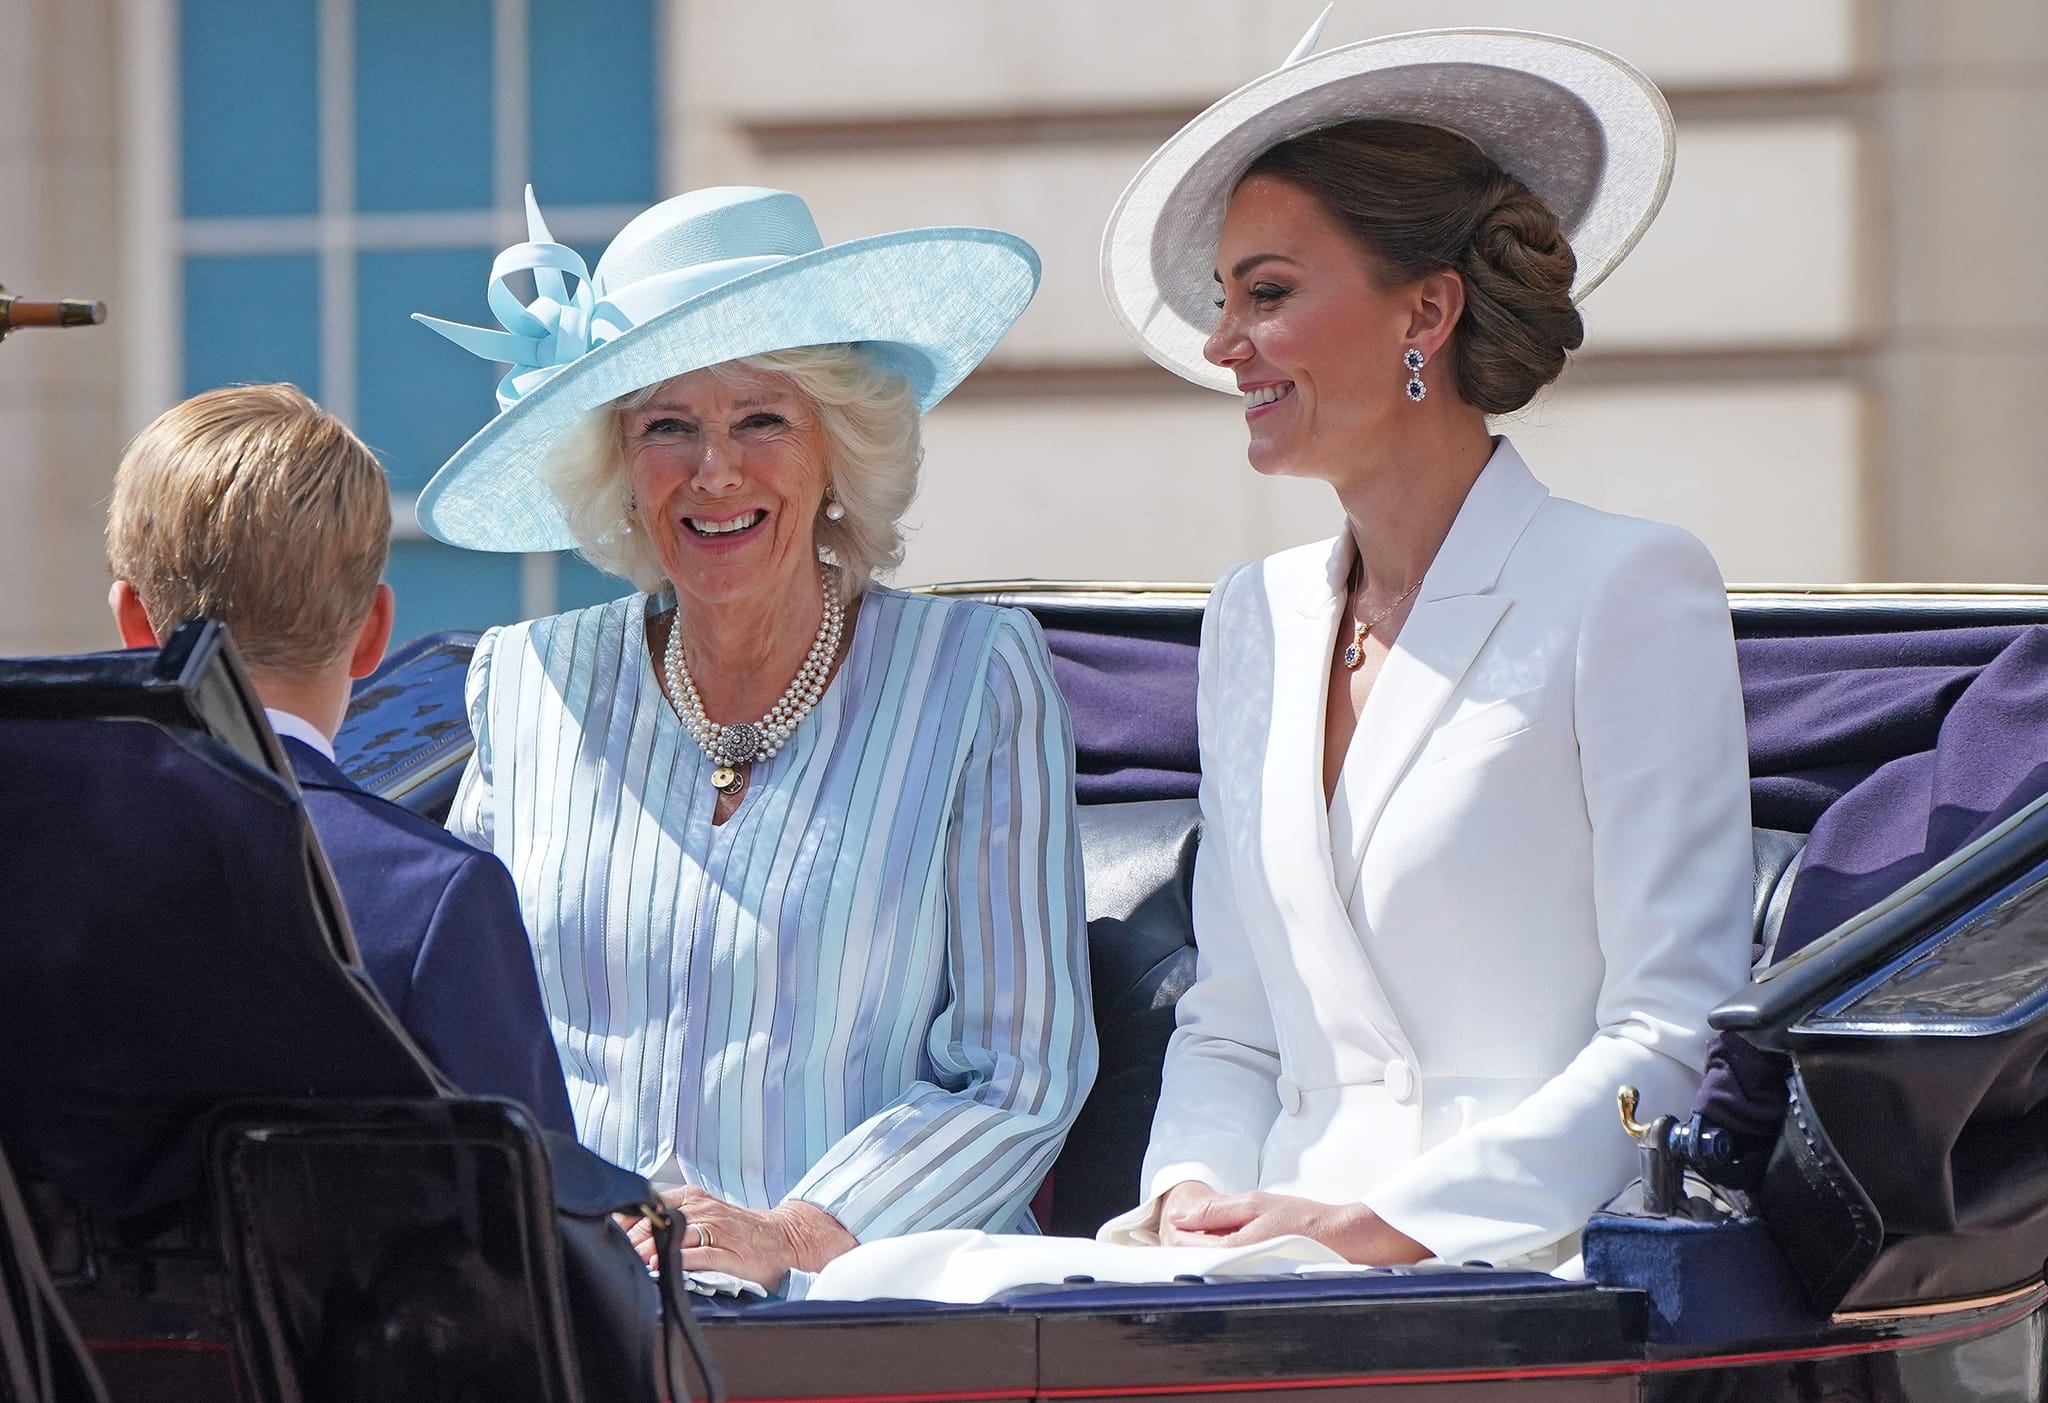 Catherine, Duchess of Cambridge, in Alexander McQueen Bespoke Coatdress and Philip Treacy Oc 915 hat with Camilla, Duchess of Cornwall, during day one of Platinum Jubilee Celebrations on June 2, 2022